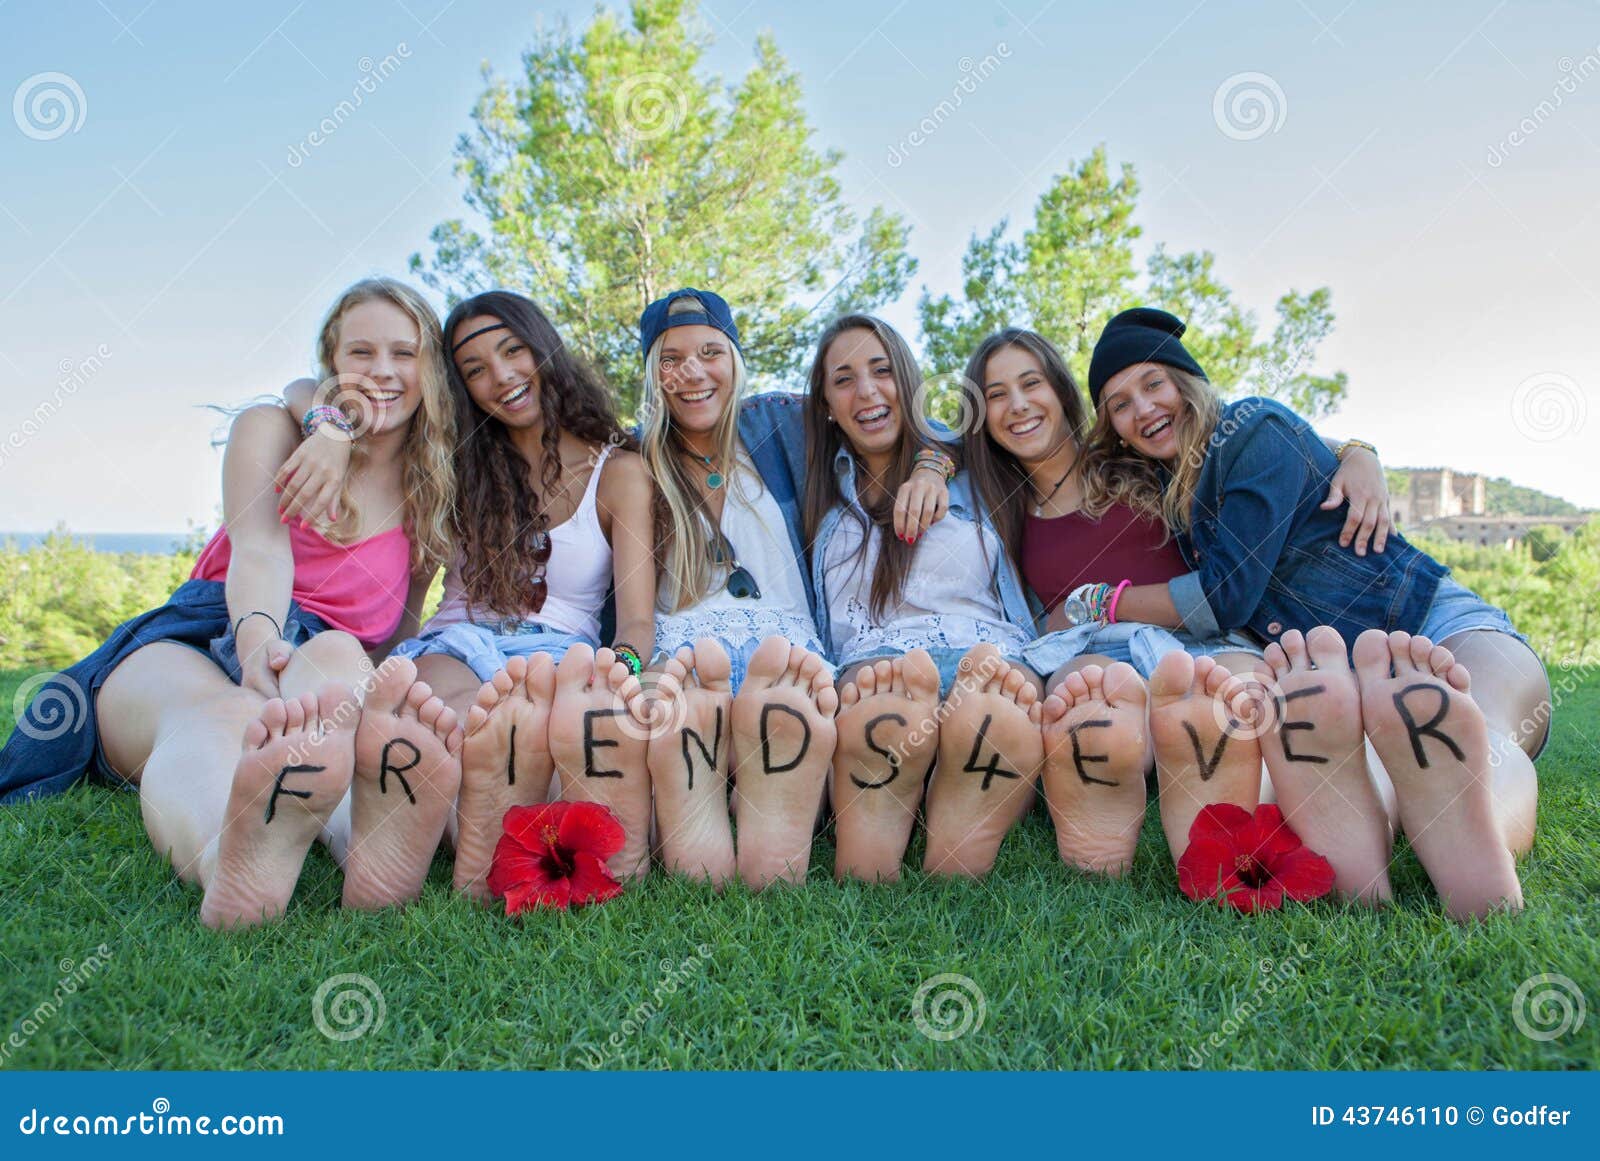 The Ultimate Collection of 4K Girls Friendship Images - Over 999 ...